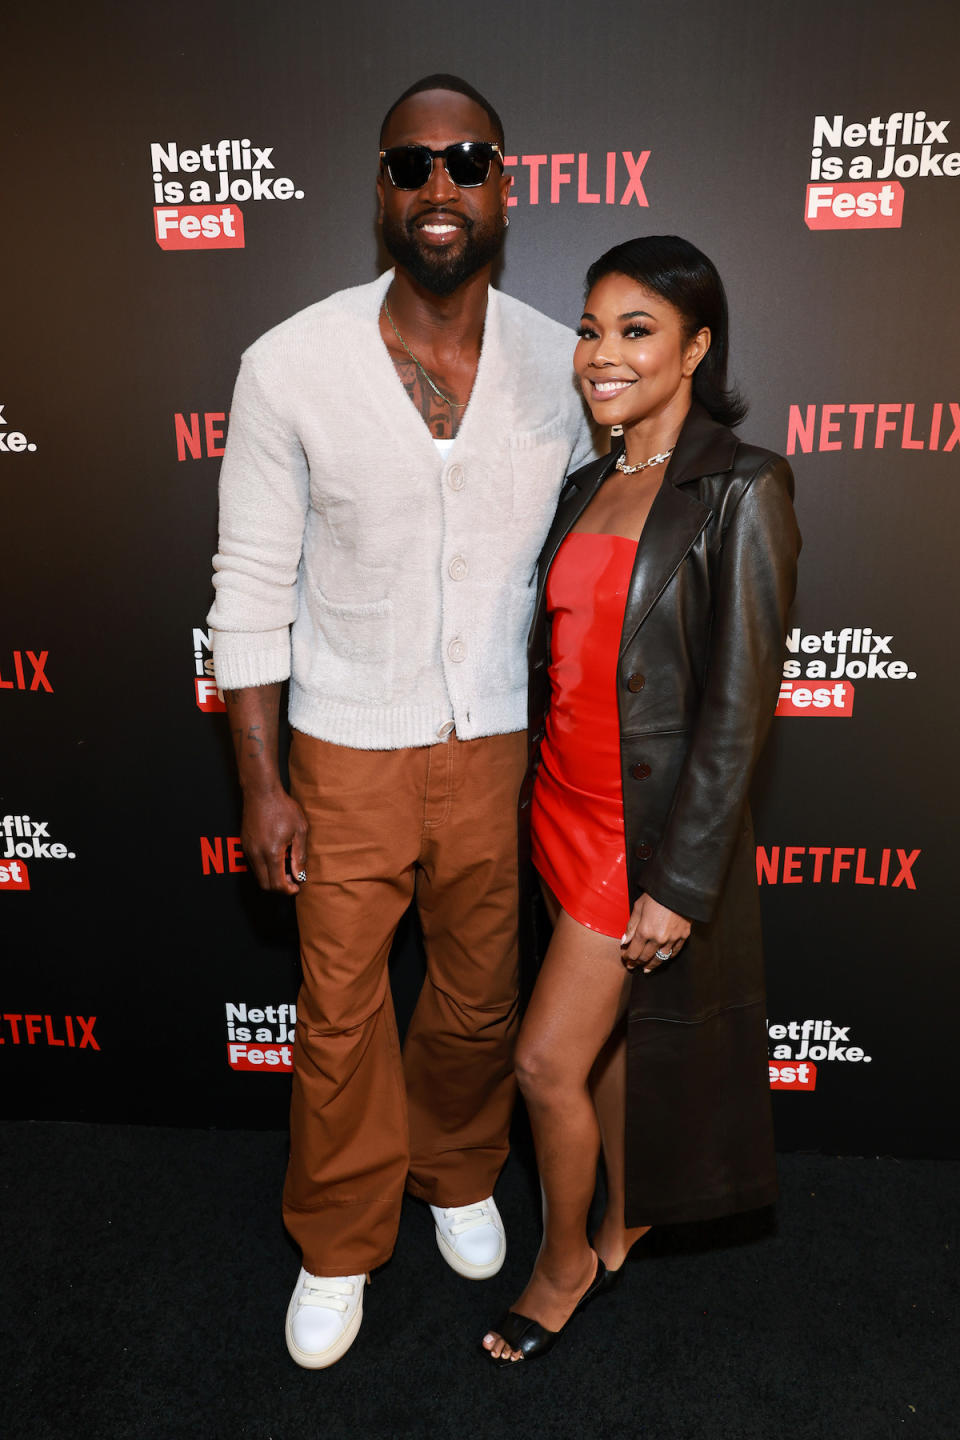 Gabrielle Union showed off her toes in an elevated black sandal for Netflix is a Joke fest while supporting her husband Dwyane Wade.